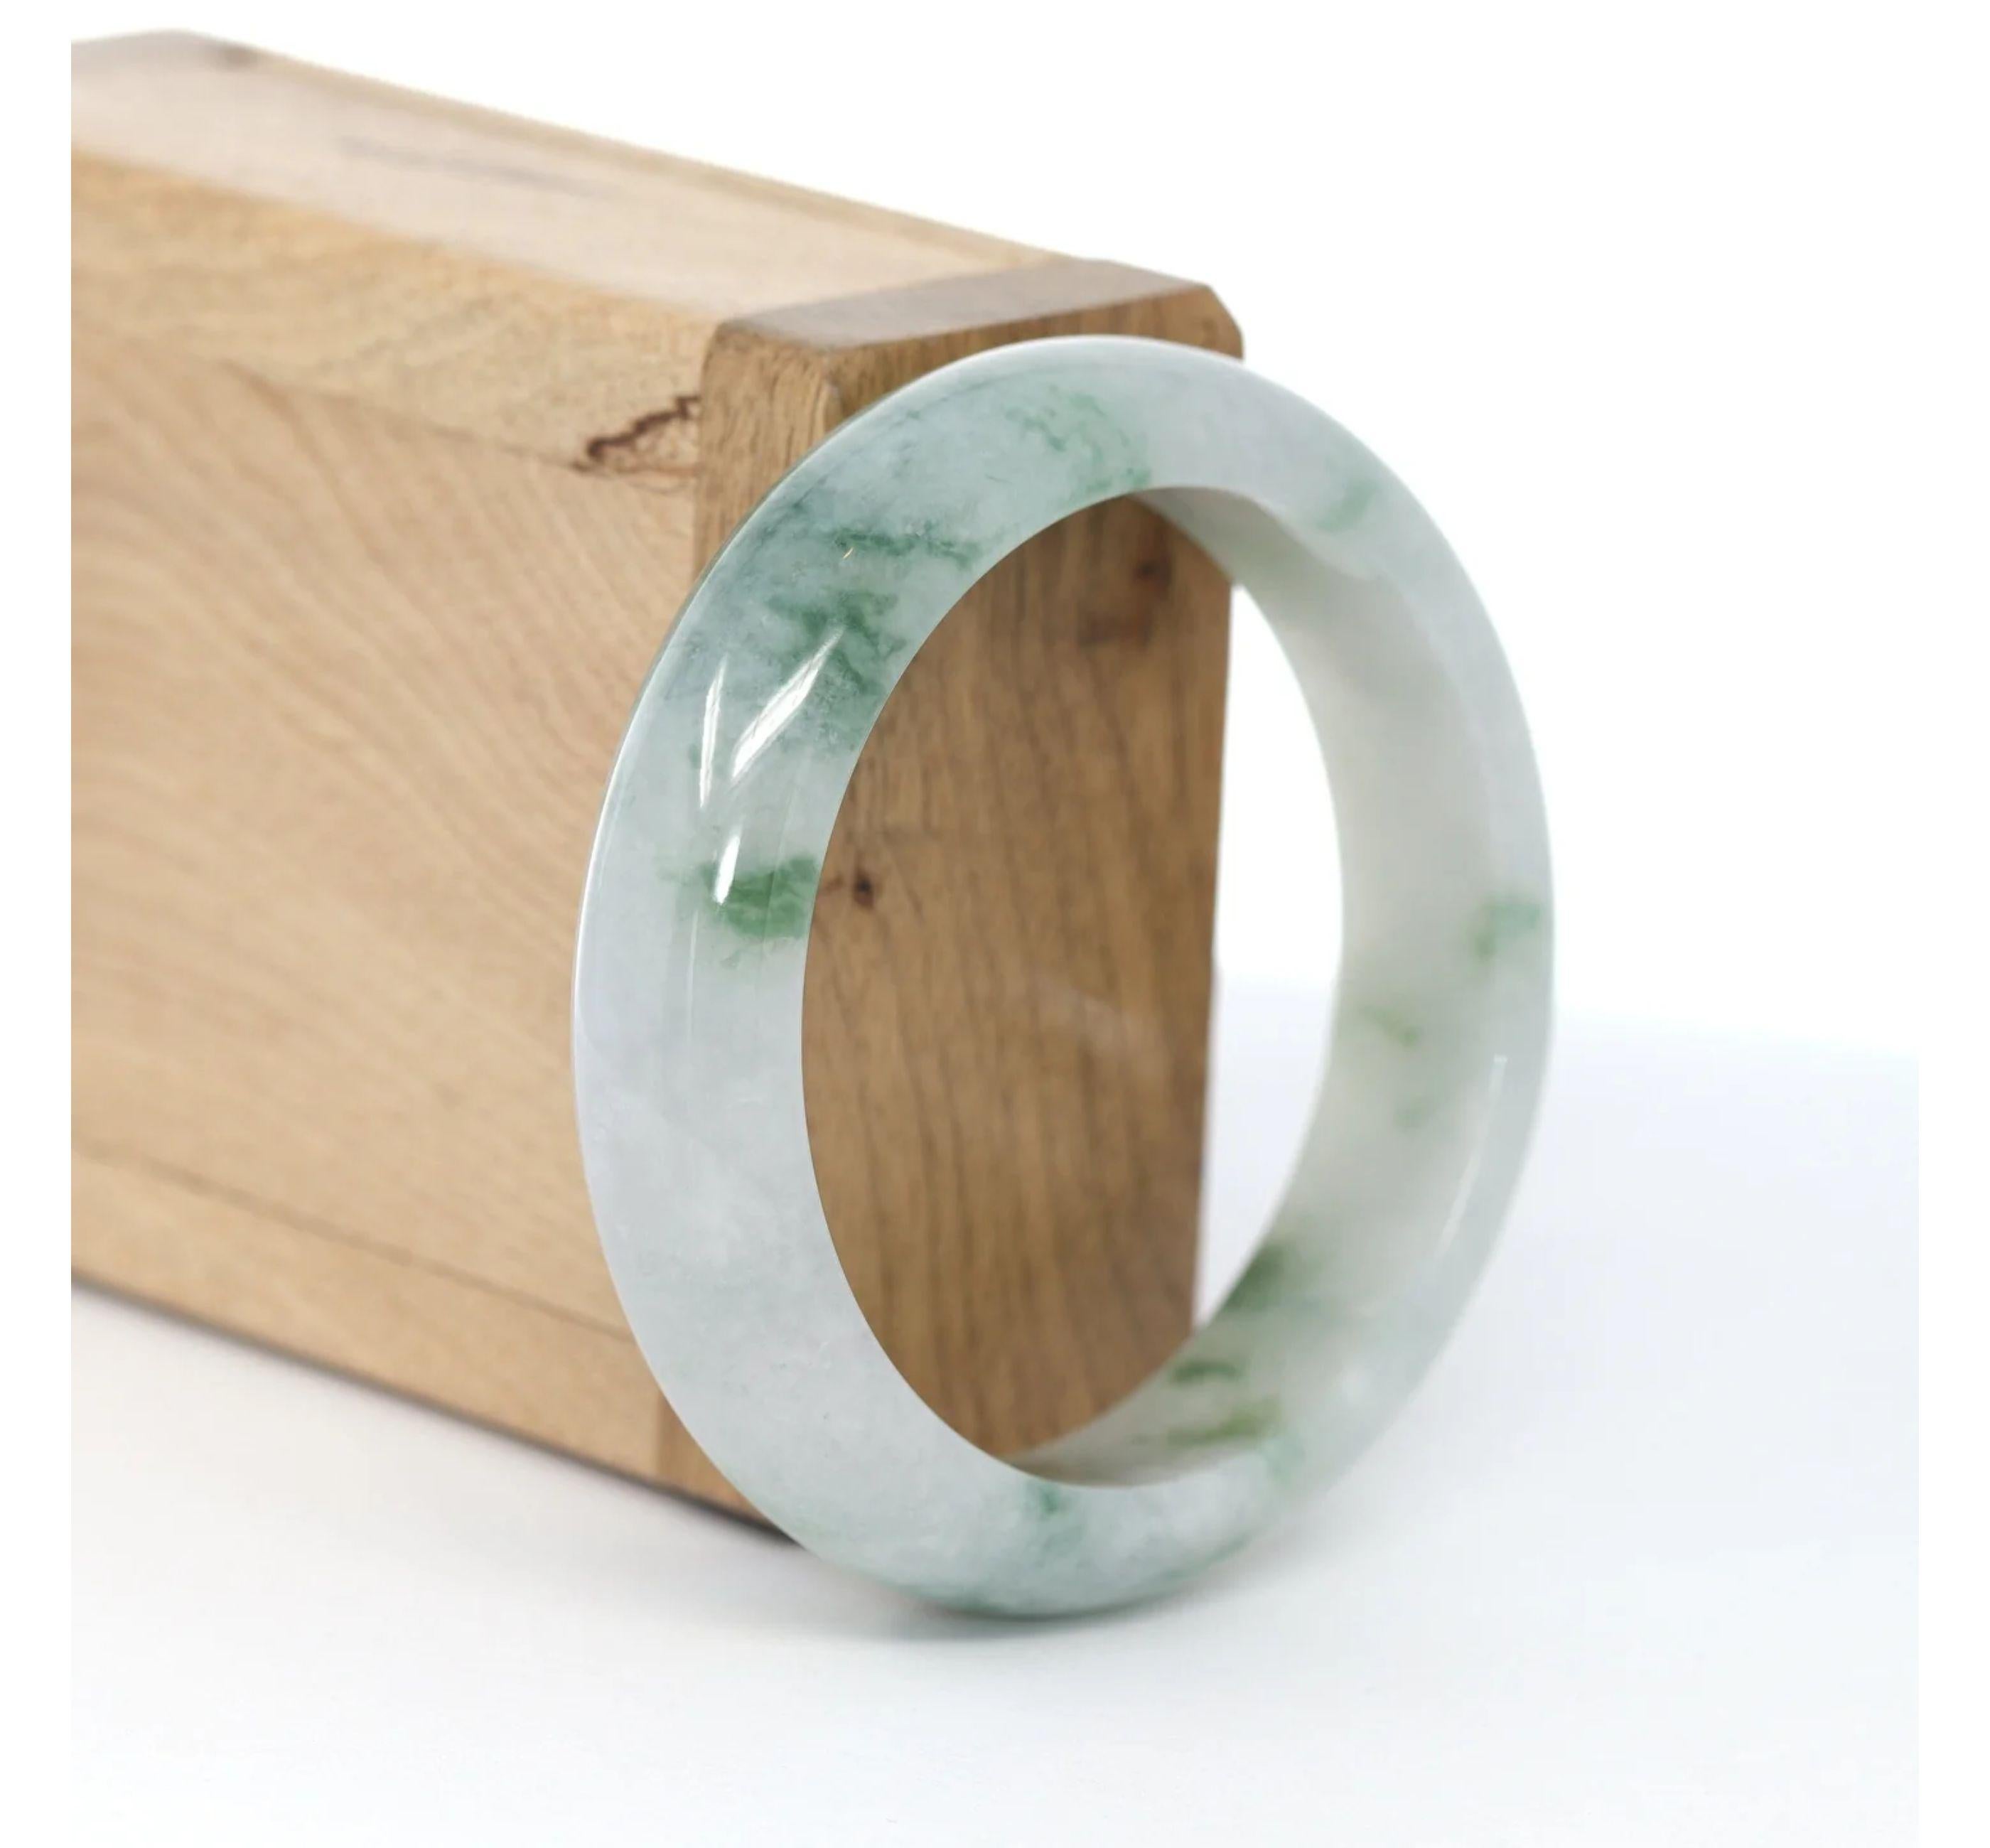 * DETAILS--- Genuine Burmese Jadeite Jade Bangle Bracelet. This bangle is made with very high-quality genuine Burmese ice-blue Jadeite jade. The jade texture is translucent and smooth with an ice blue-green color. It looks so beautiful as a